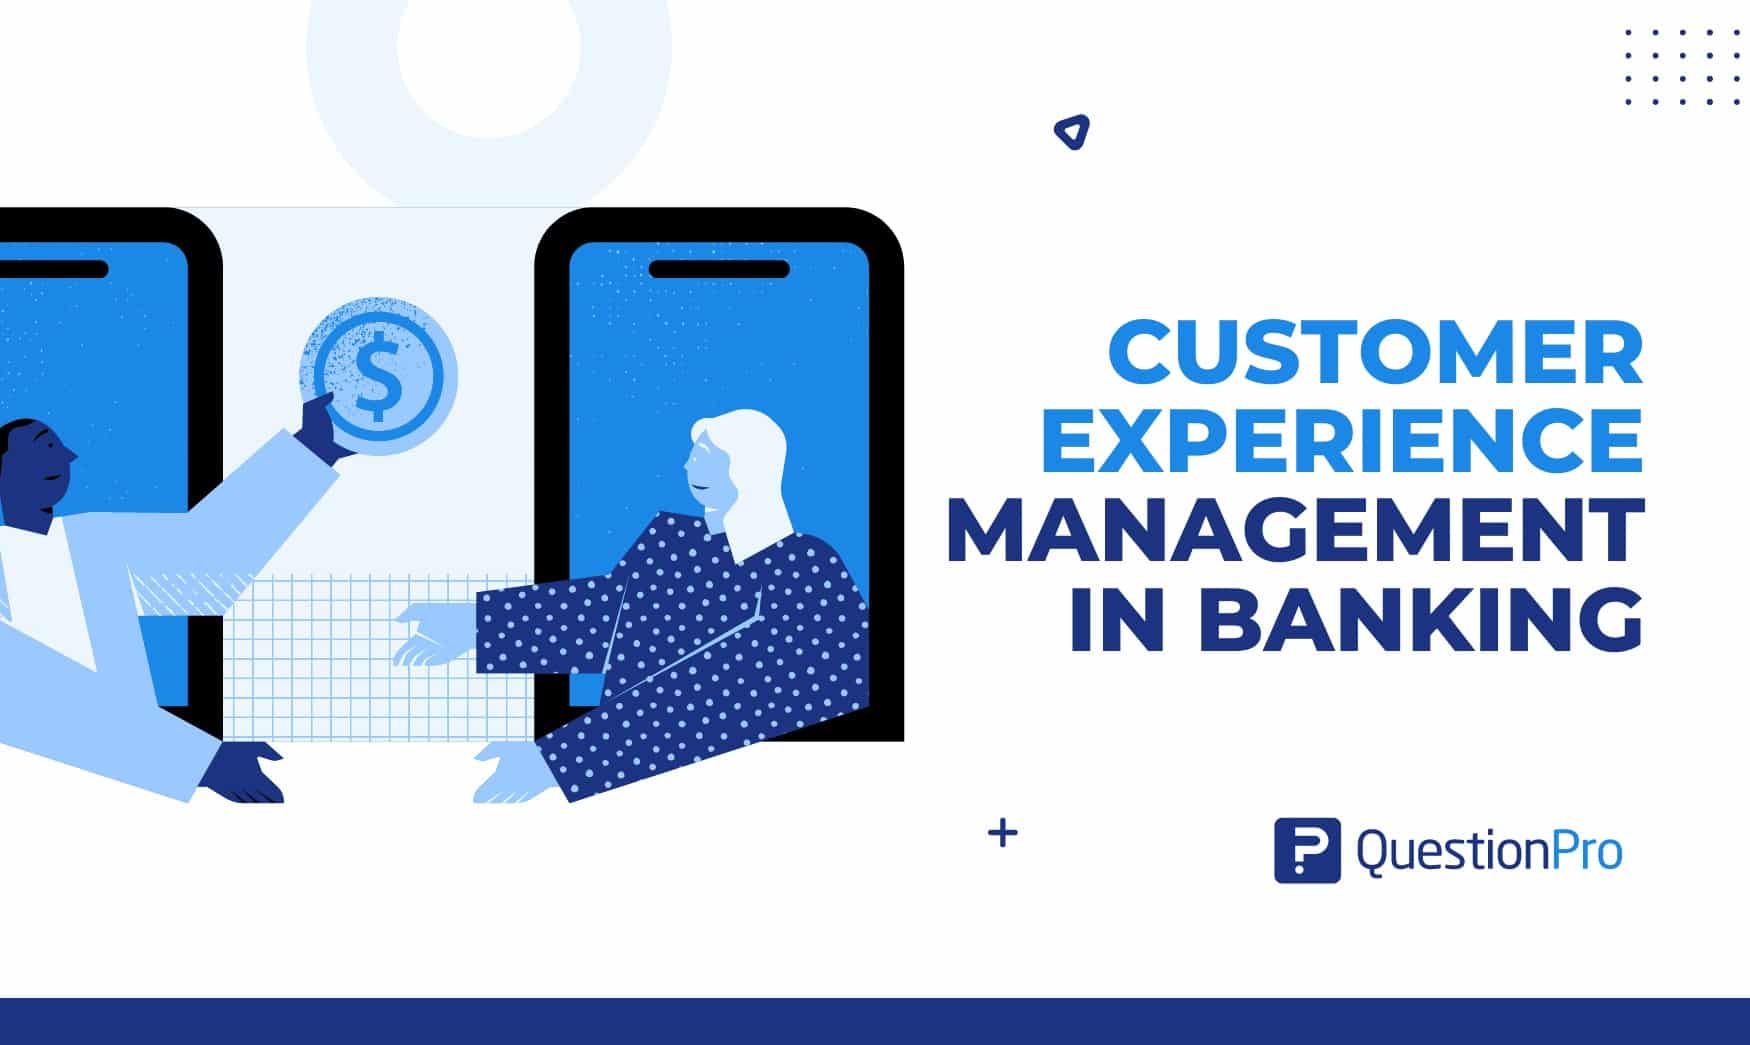 How to Use Customer Experience Management in Banking